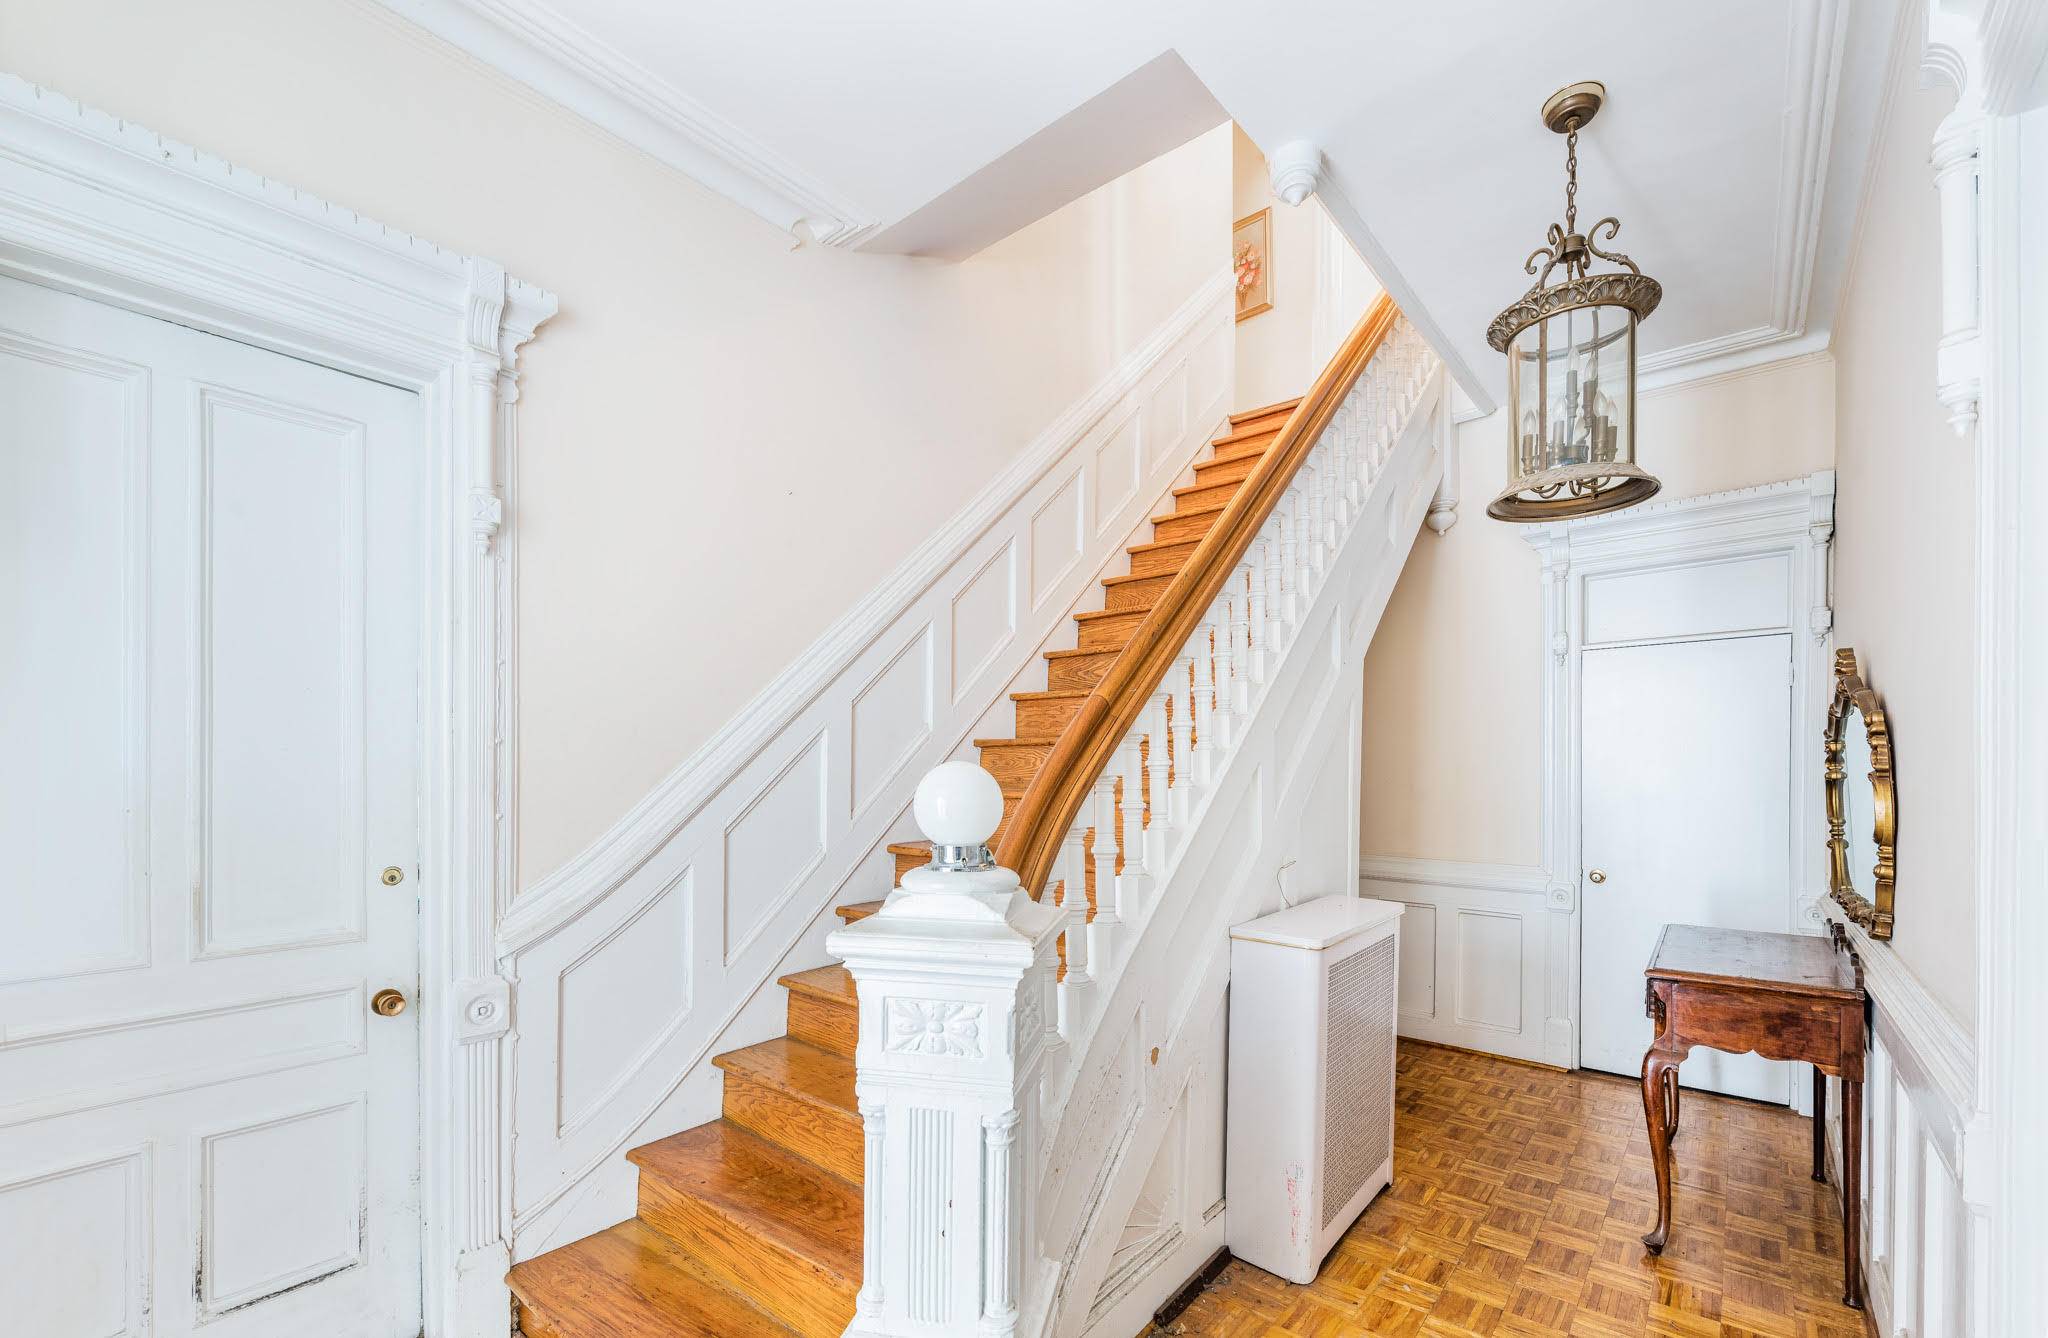 Owning a freestanding Victorian home in Brownstone Brooklyn is a fantasy that one rarely has the opportunity to fulfill.